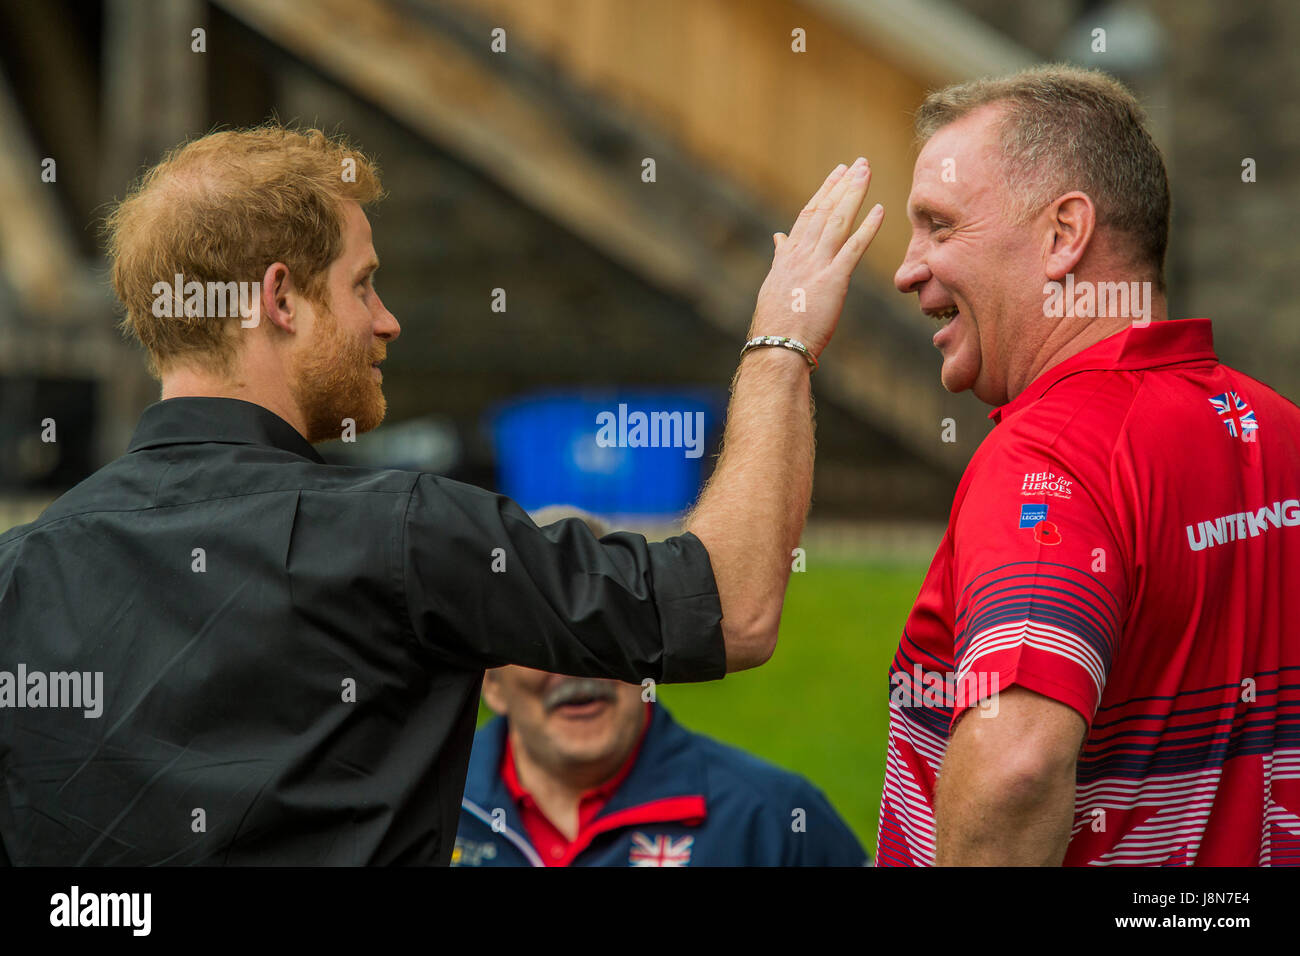 London, UK. 30th May, 2017. Prince Harry shares a joke with team members as he attends the launch of UK team for the Invictus Games Toronto at Tower of London. The Invictus Games was set up for injured soldiers. London 30 May 2017 Credit: Guy Bell/Alamy Live News Stock Photo